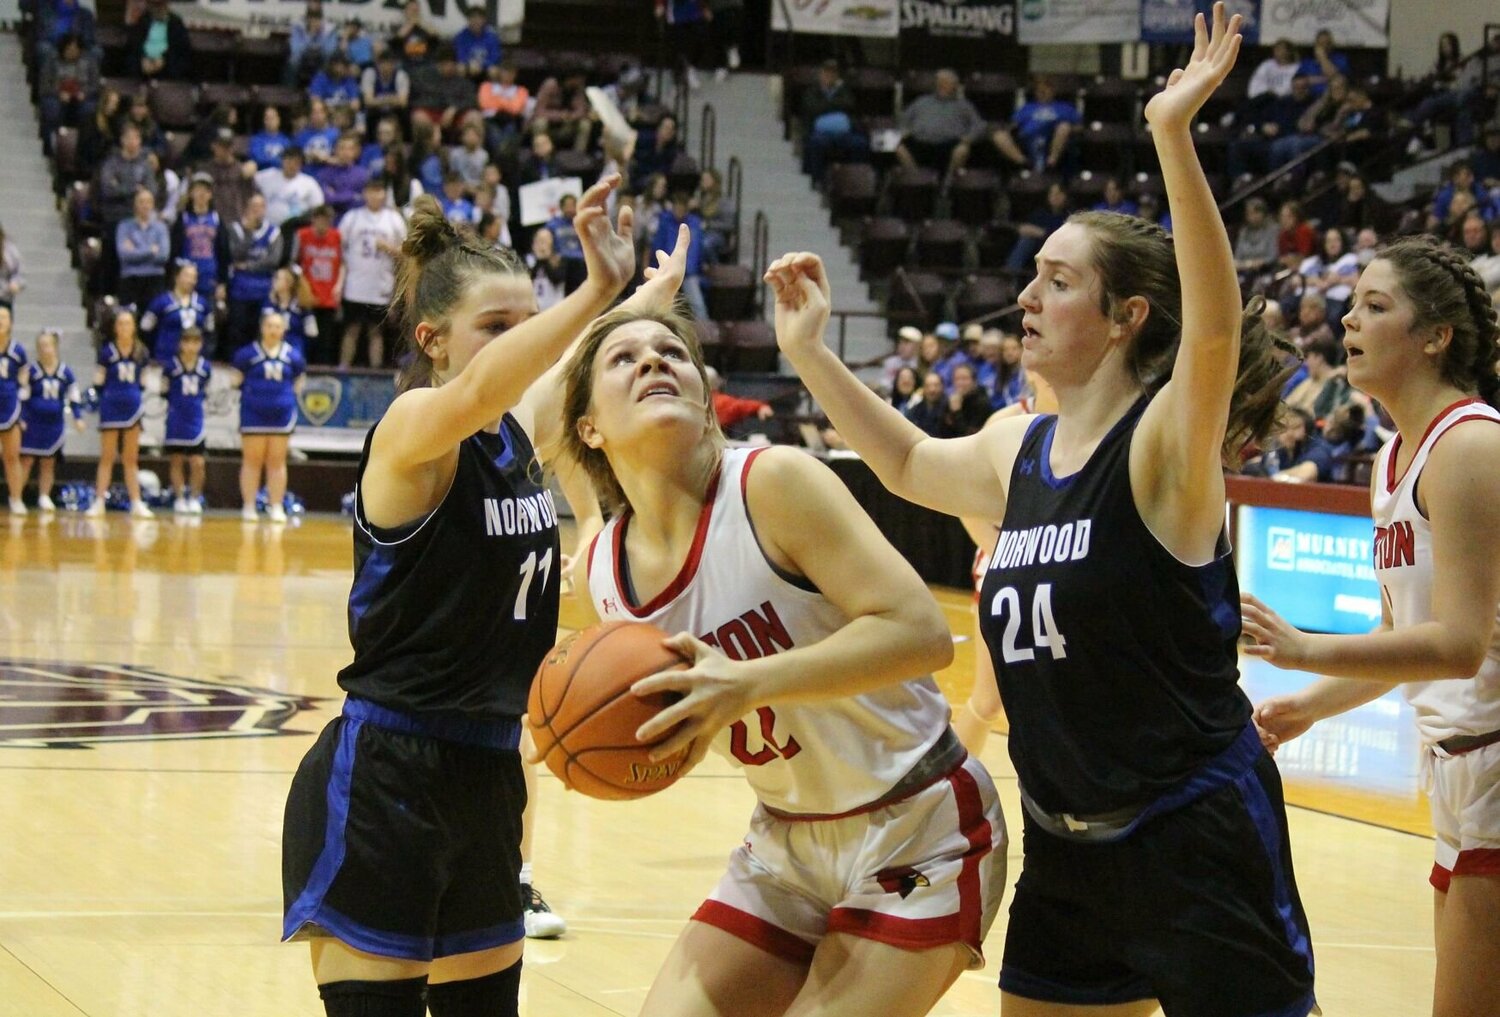 Tipton senior Briar Cox waits for a chance to put up a basket in the paint against Norwood in Friday's Class 2 Girls Basketball state semifinal at Hammons Student Center in Springfield. 